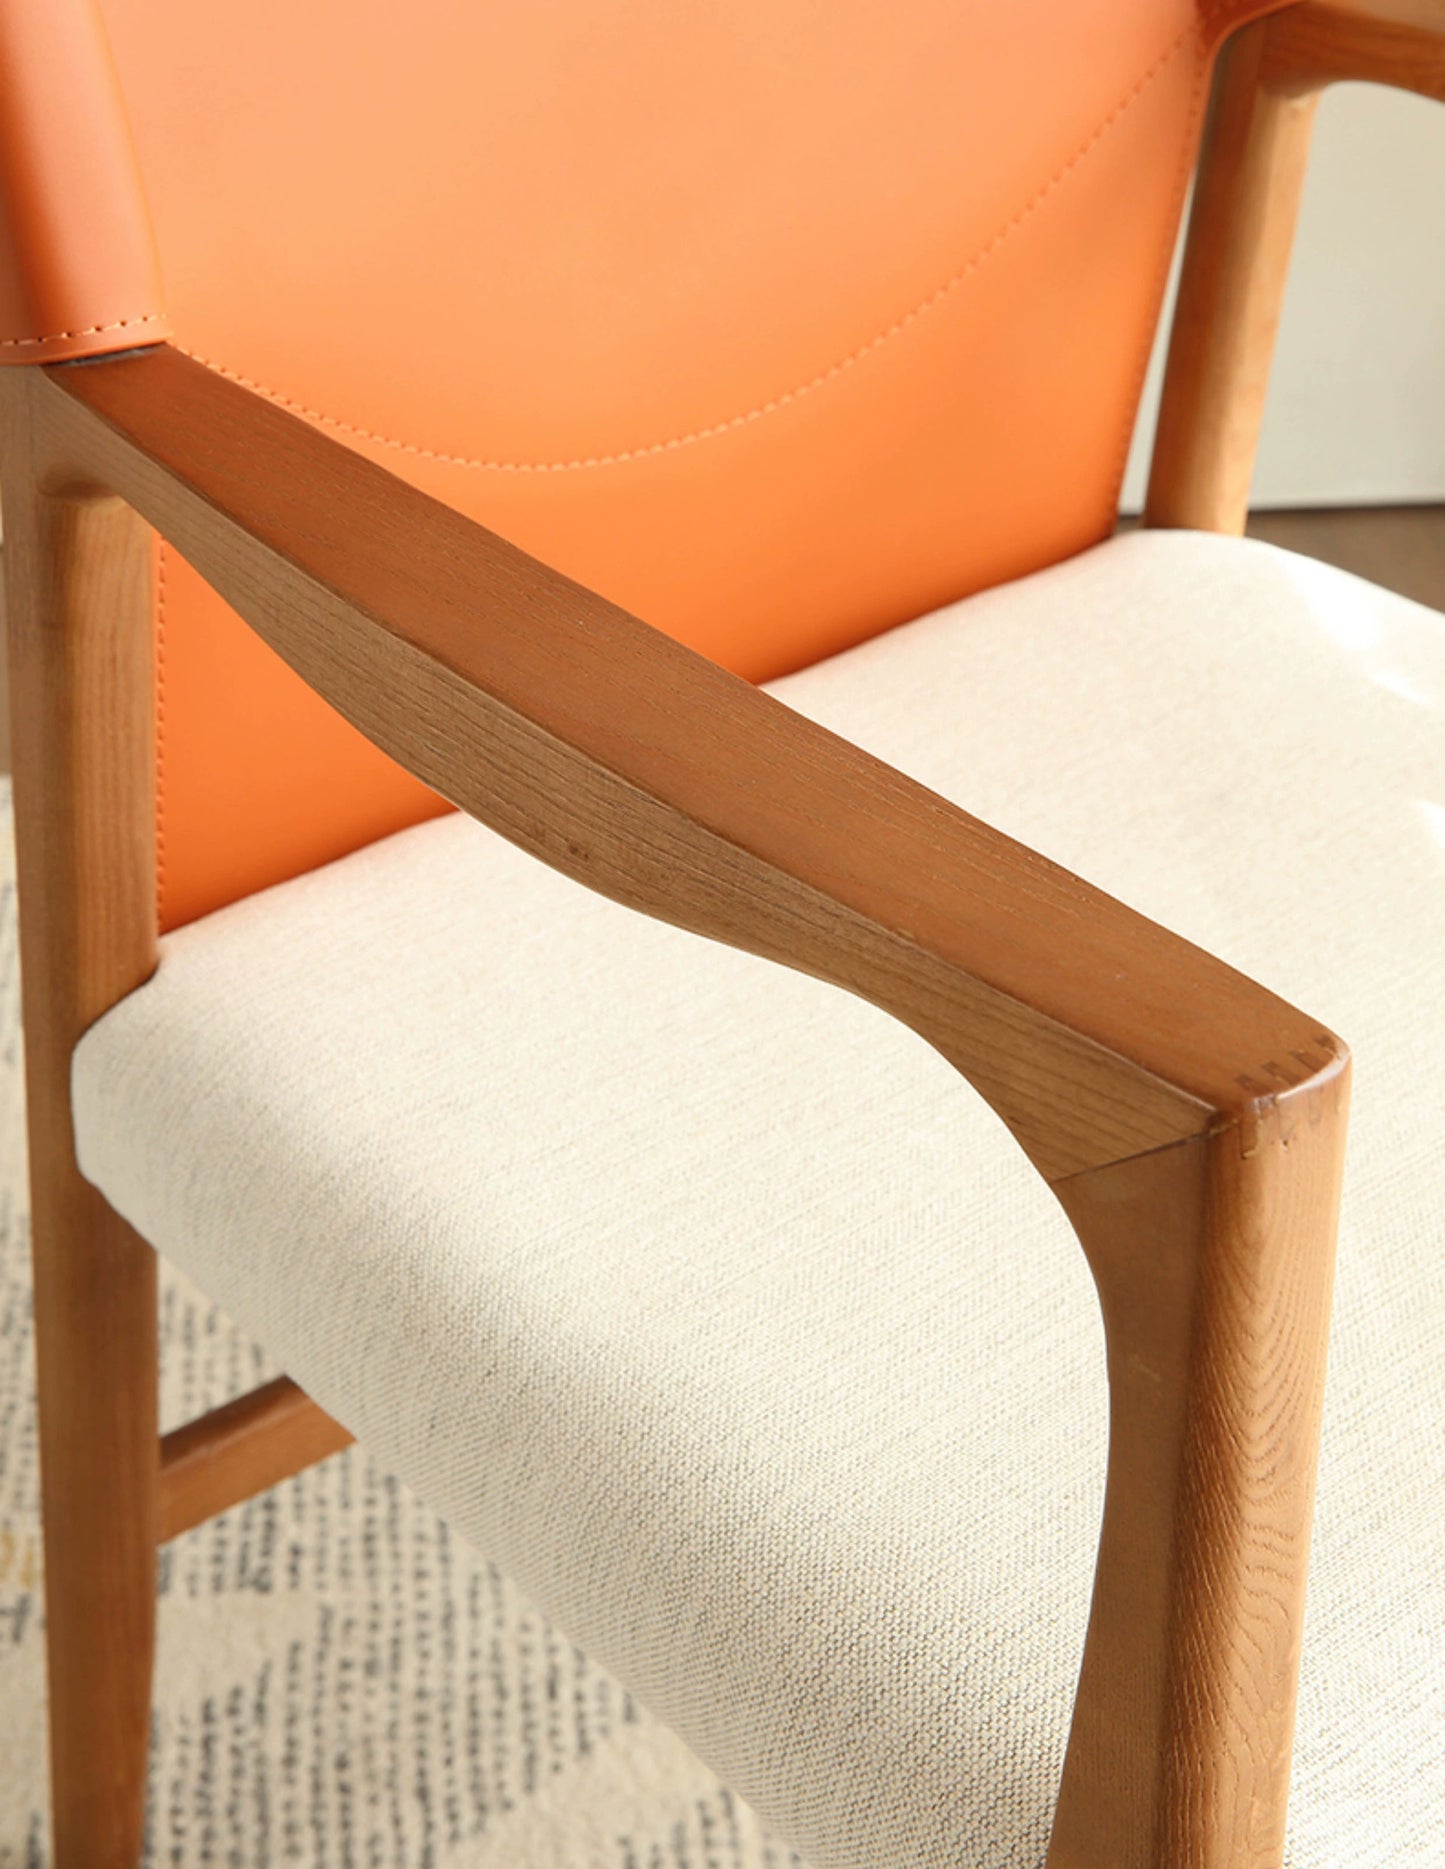 Pree Wooden Dining Chair from maija